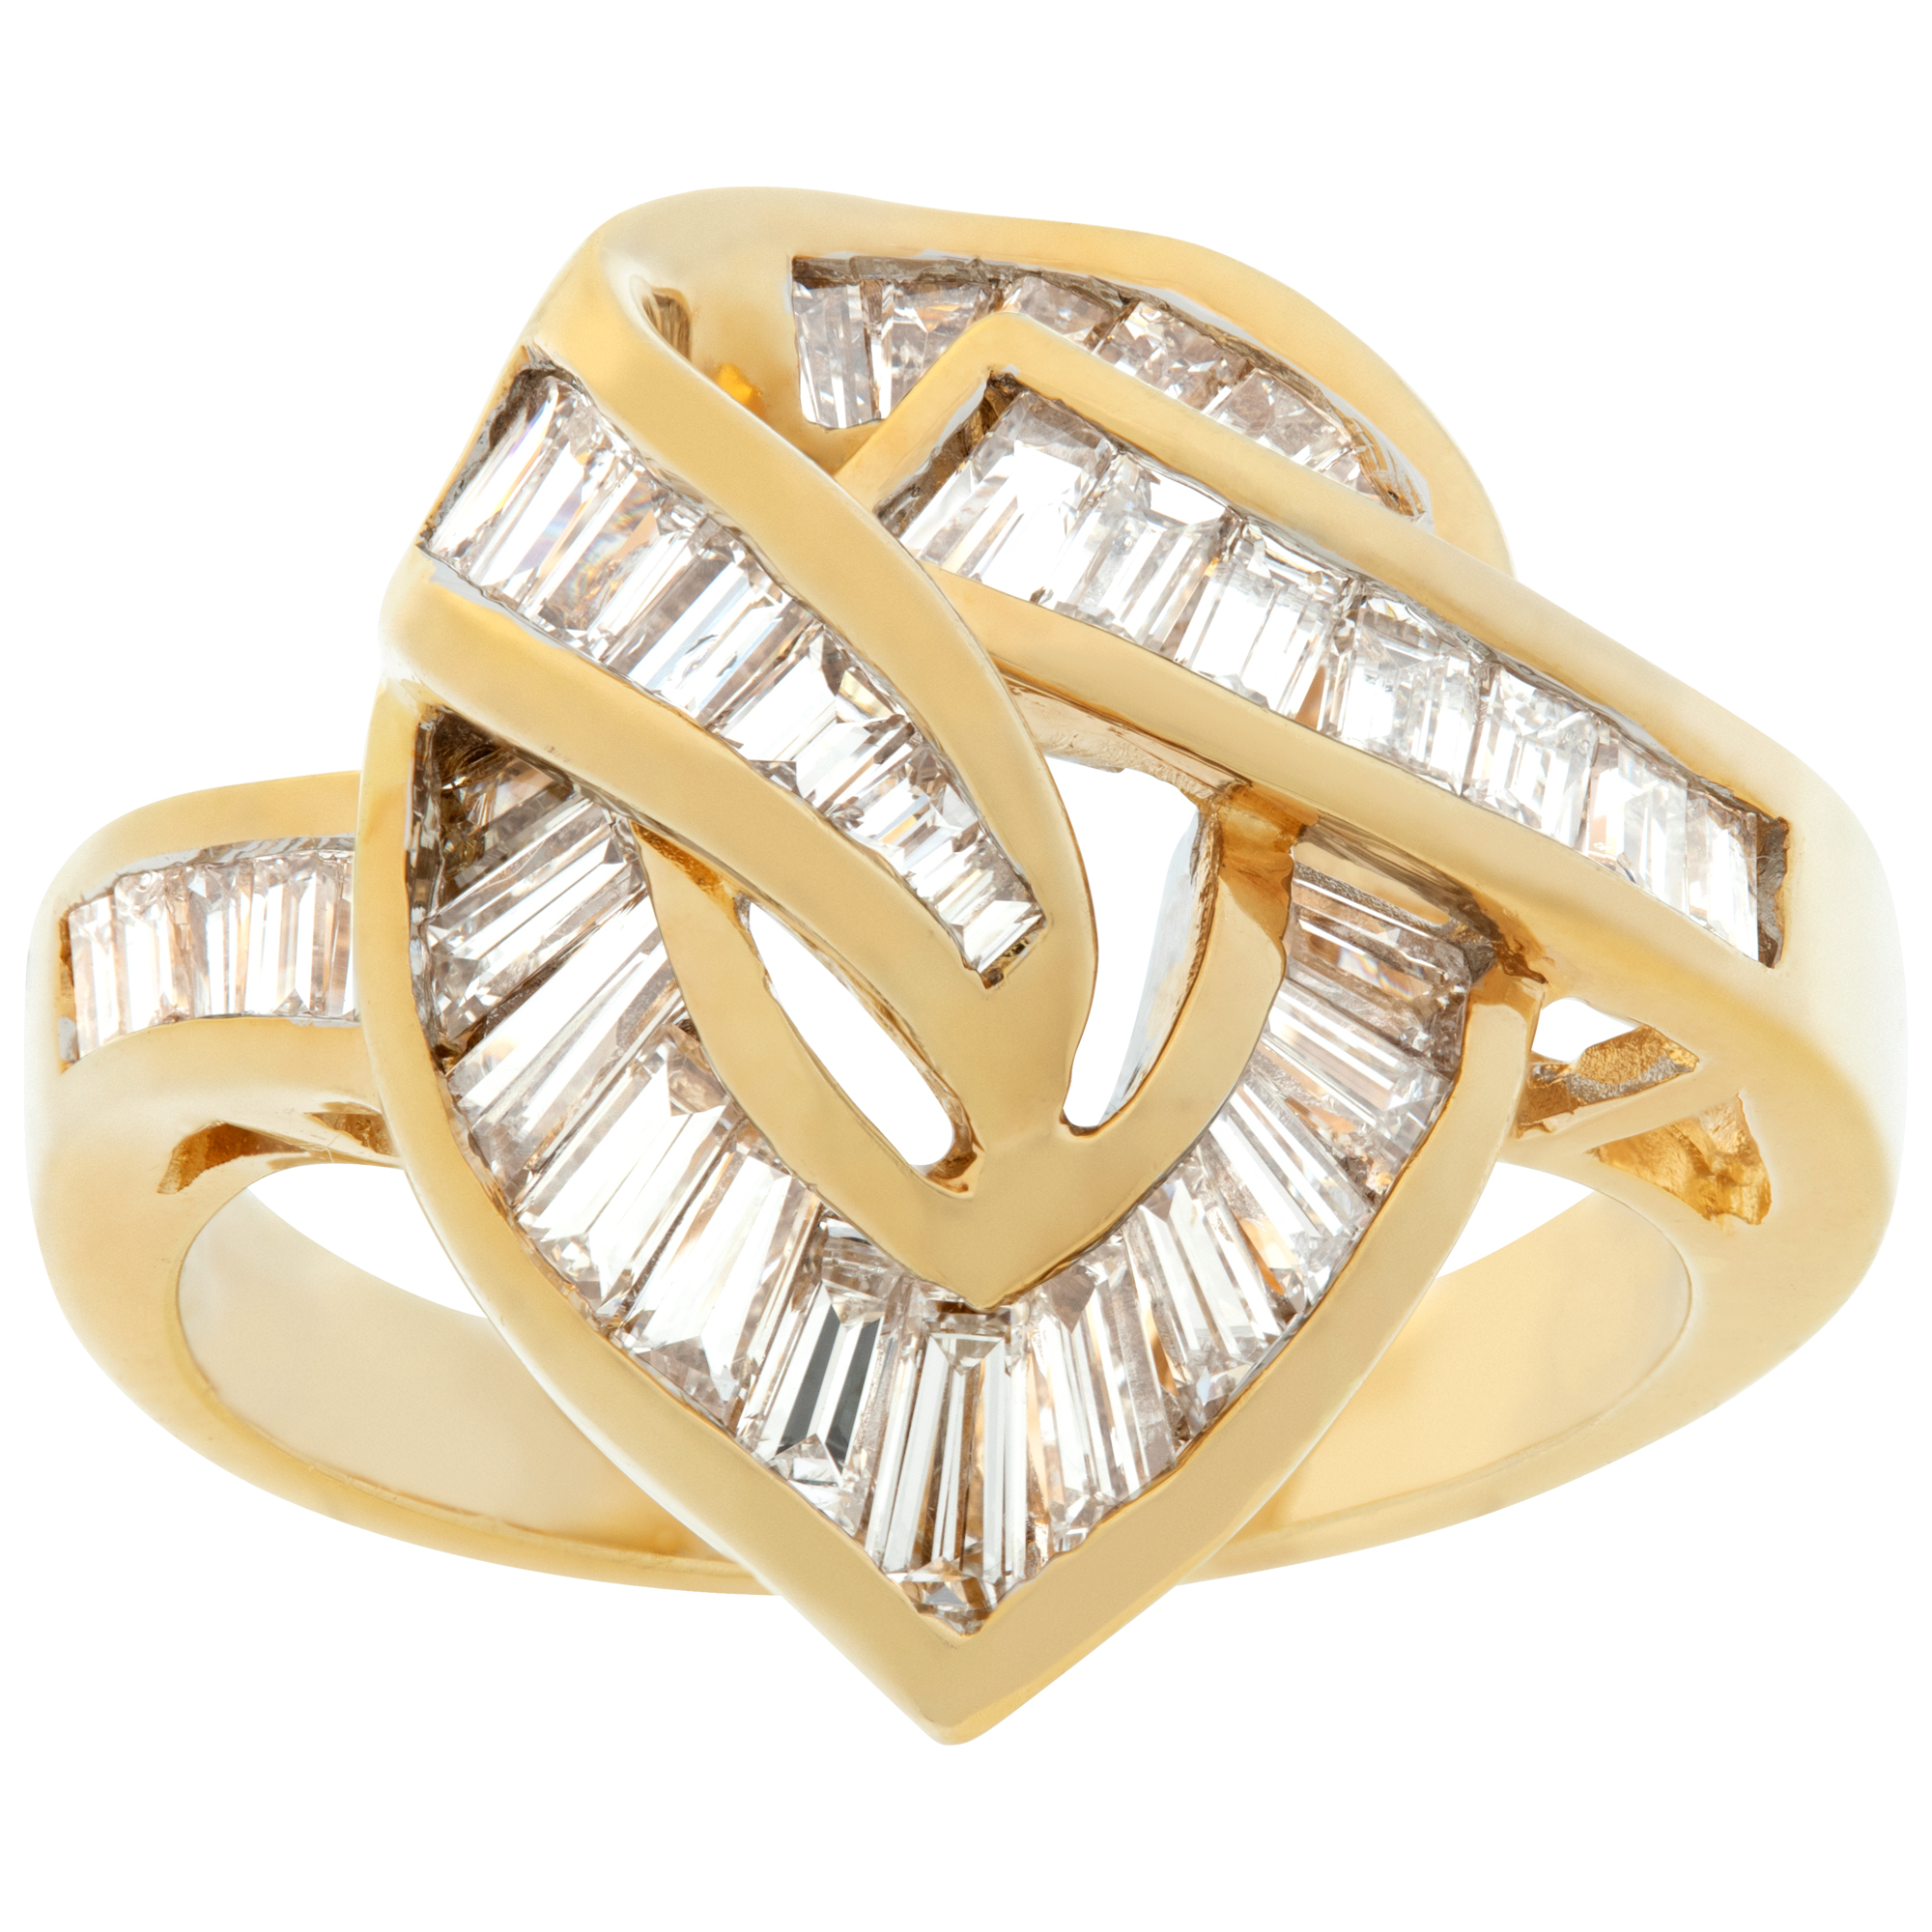 18k yellow gold swirl of diamonds ring with approximately 3 carats in baguette